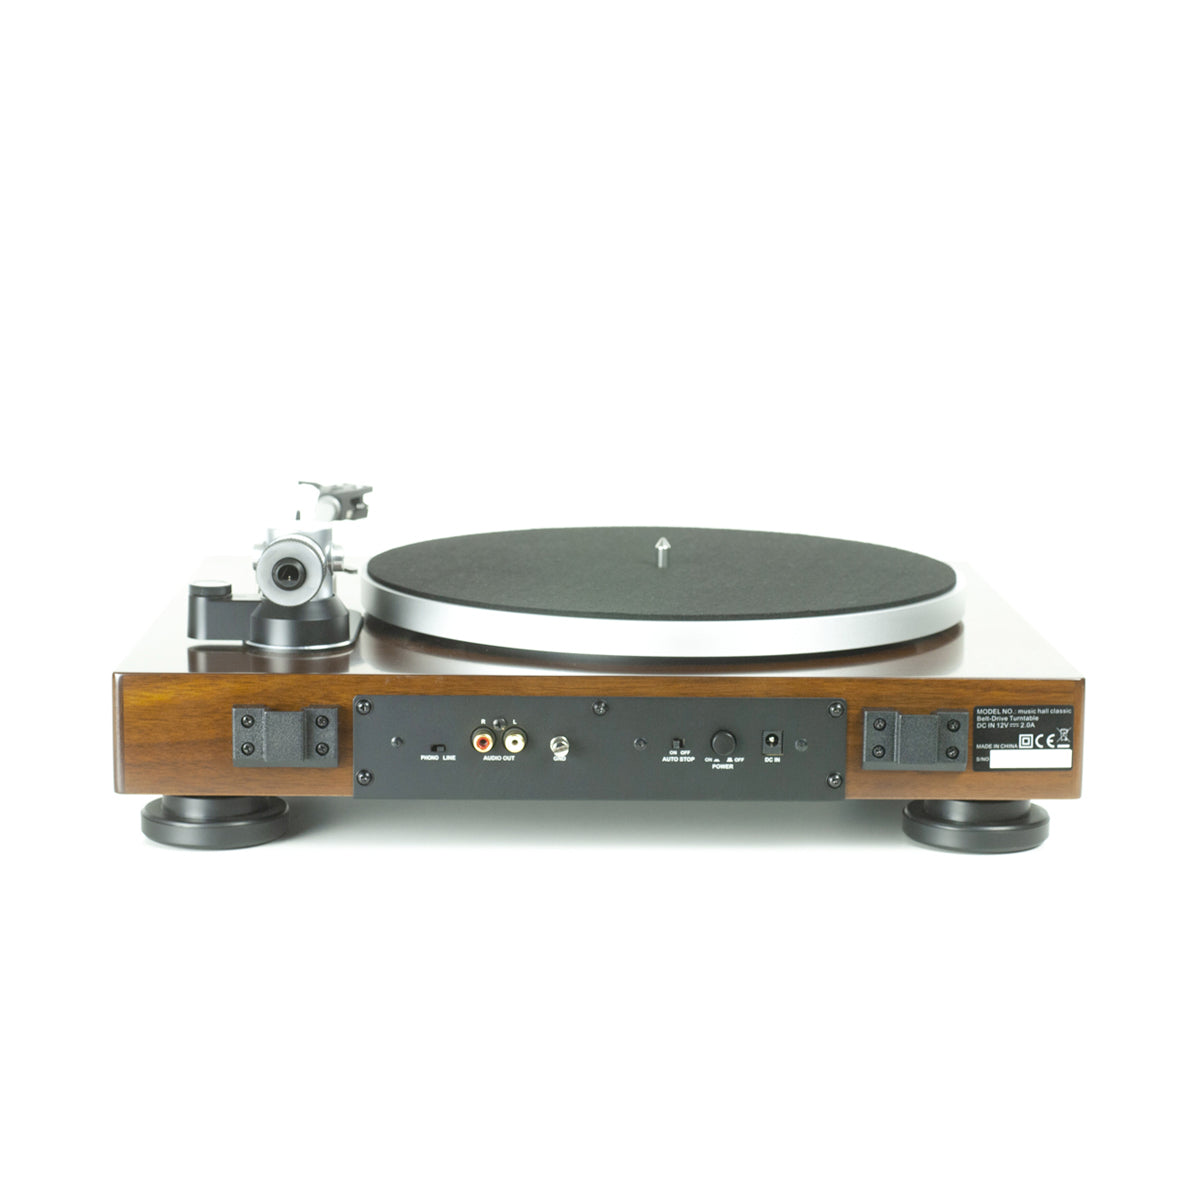 Music Hall Classic Turntable Walnut - The Audio Experts